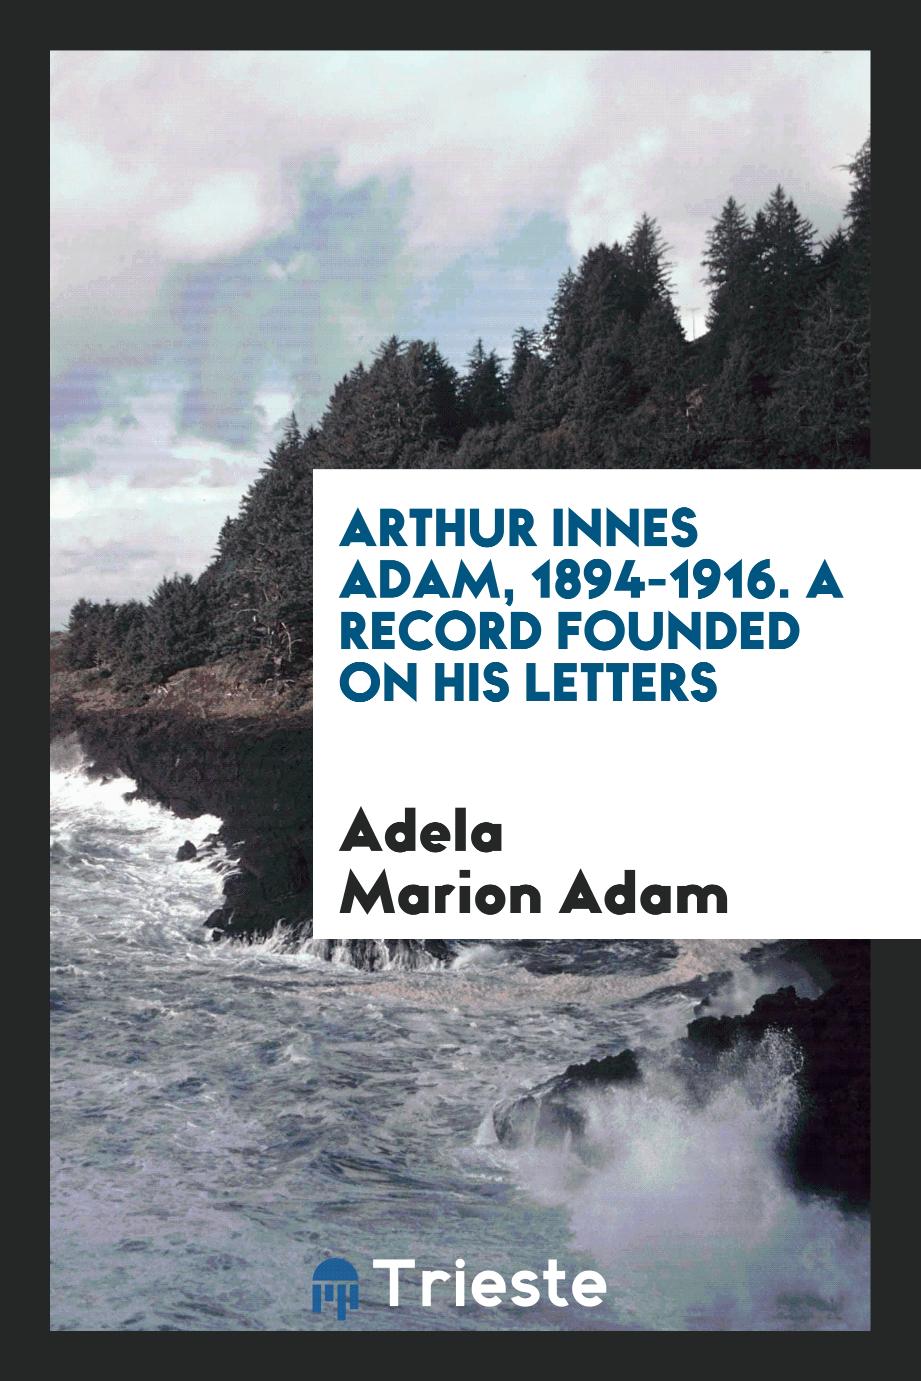 Arthur Innes Adam, 1894-1916. A record founded on his letters